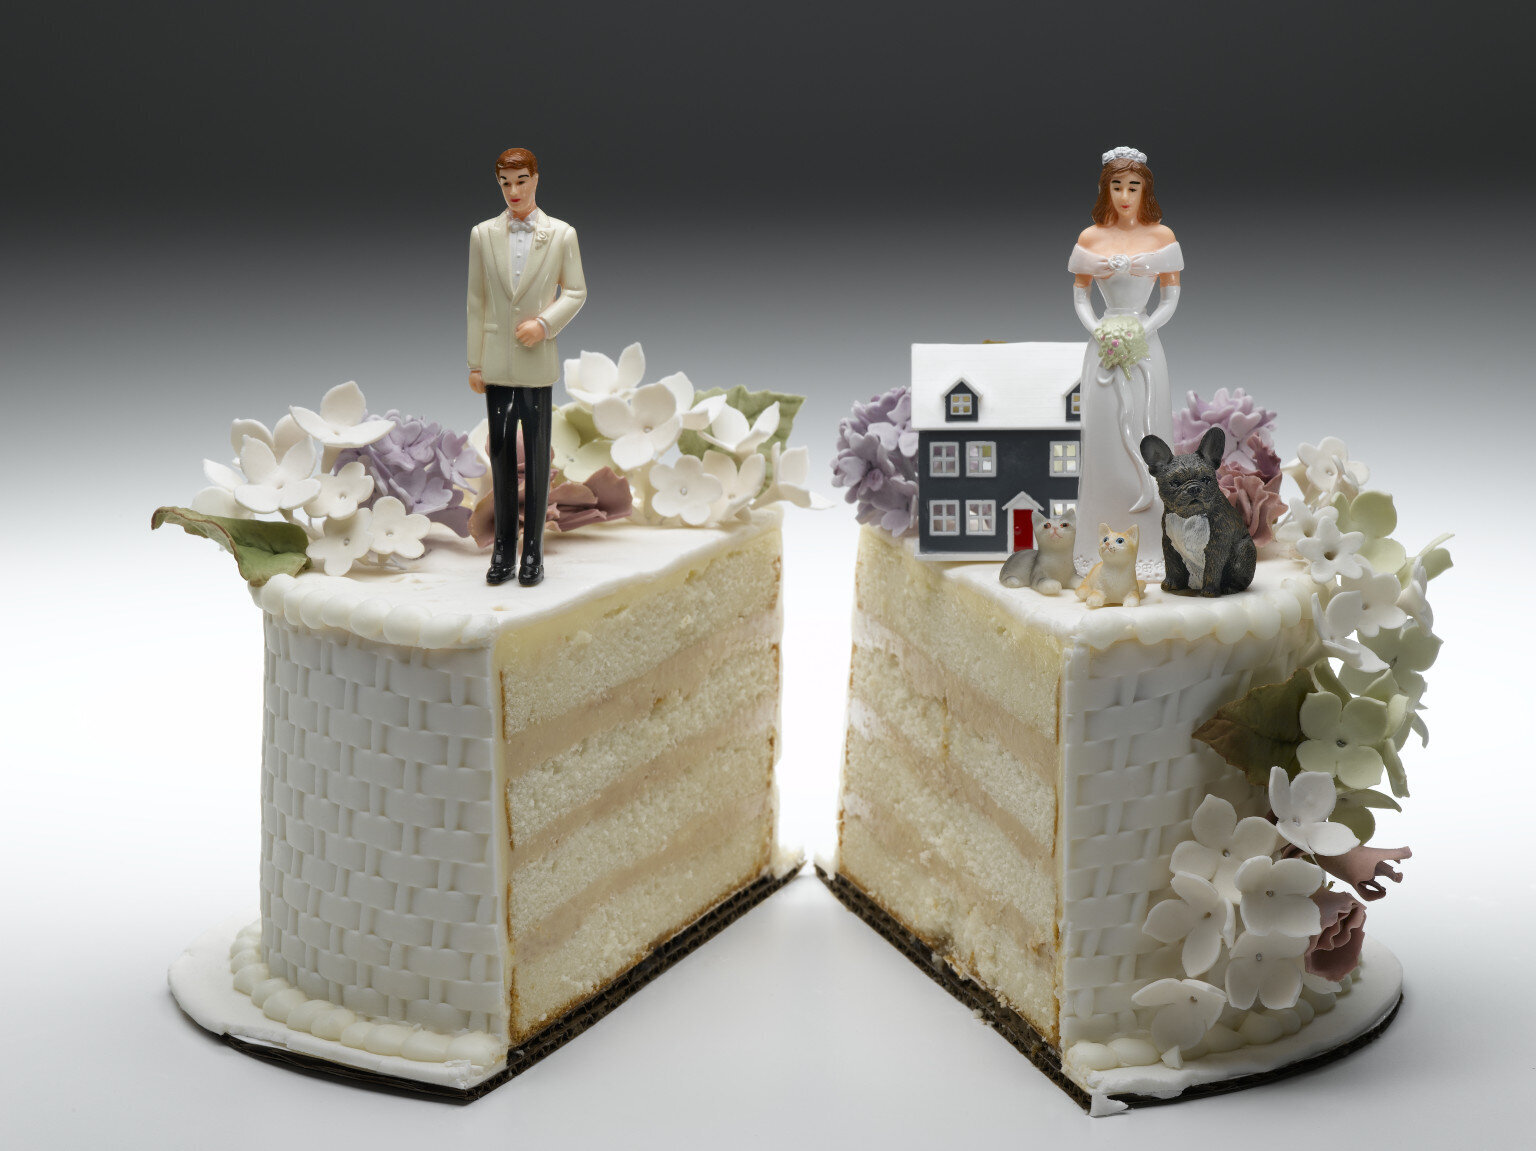 Divorce Cakes' Are Totally A Thing And I Can't Quit Laughing!